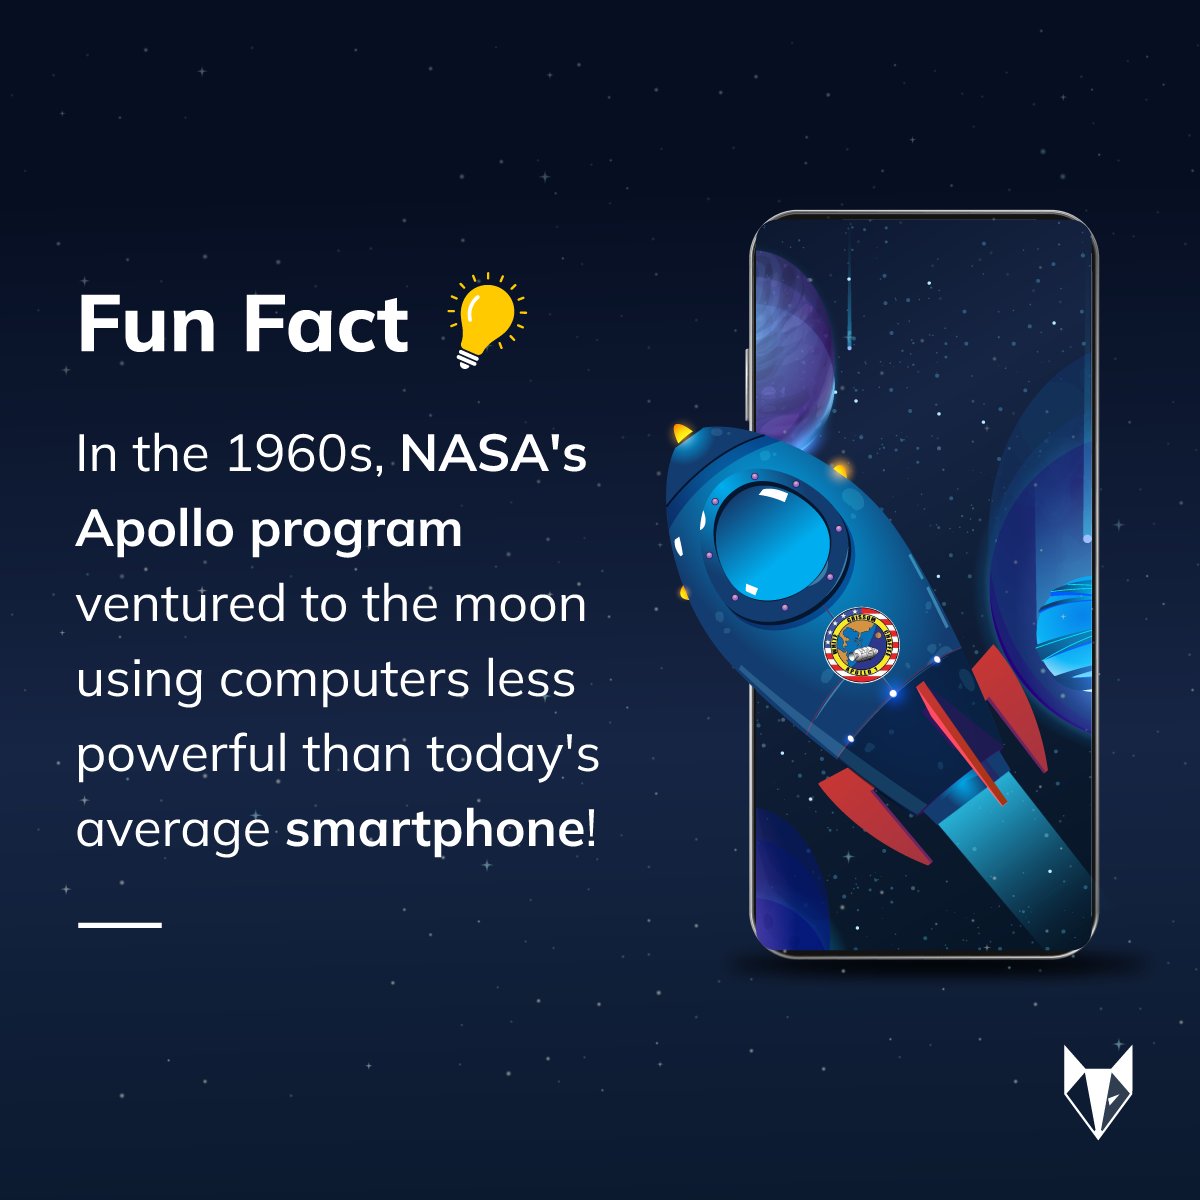 In the 1960s and 1970s, NASA utilized pioneering computer systems for space exploration, which were relatively basic compared to smartphones today. Next time you see your phone, you know you have the power of innovation at your fingertips.
 
#TechMarvels #SpaceExploration